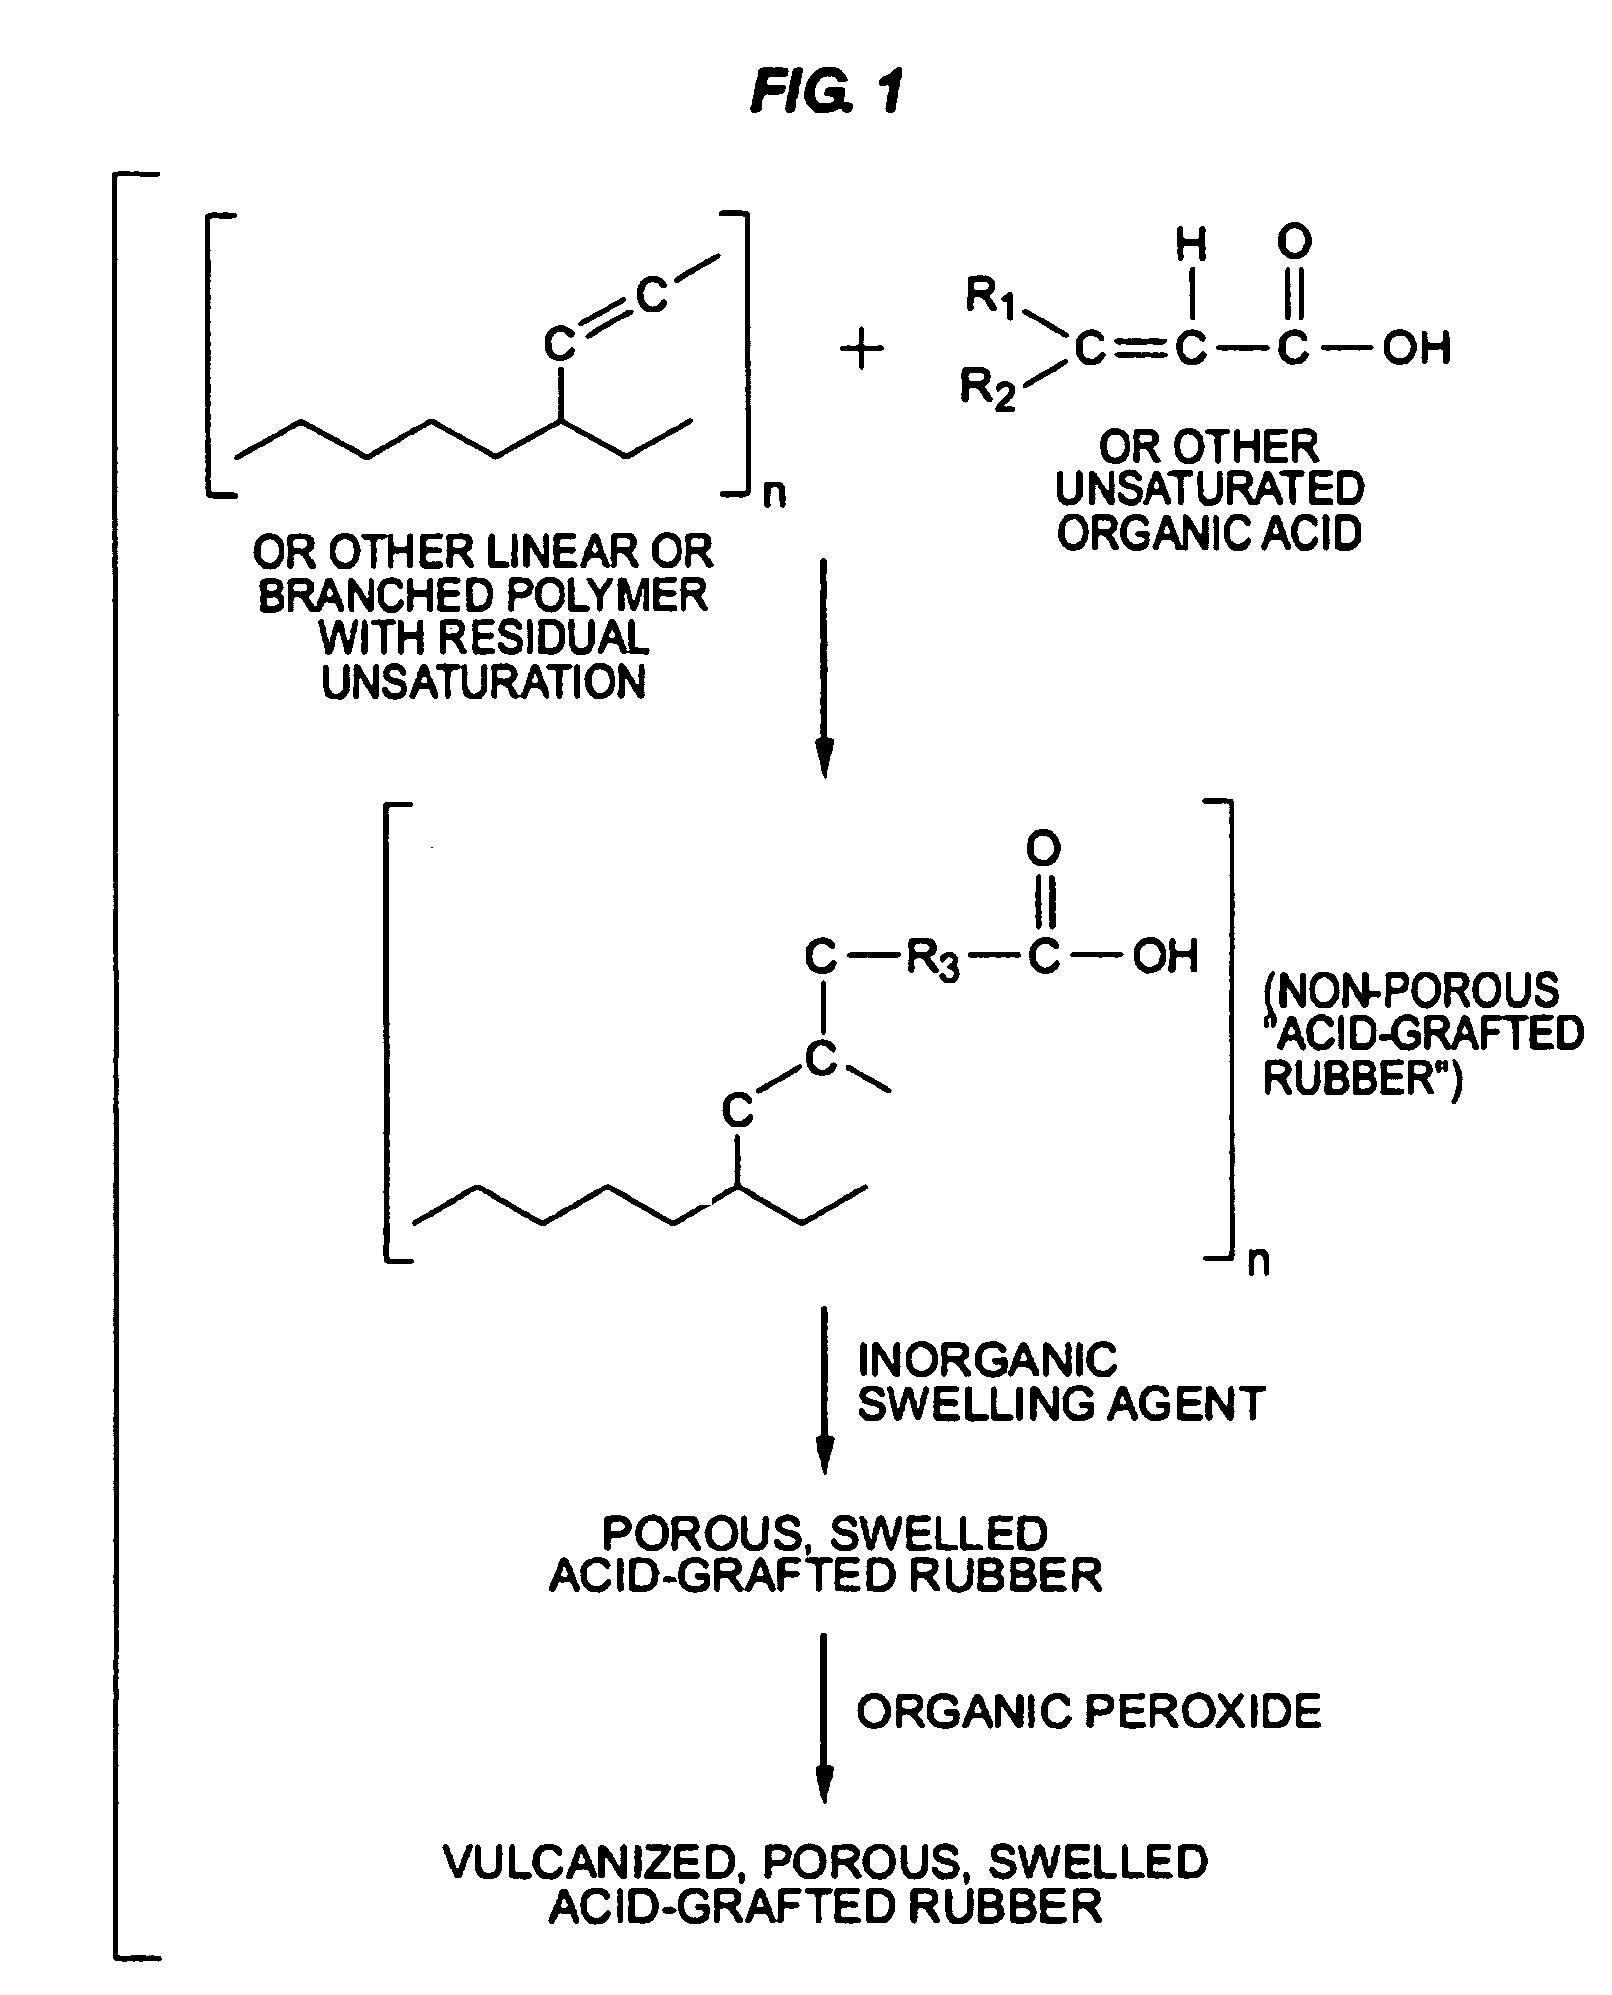 Swellable elastomer-based apparatus, oilfield elements comprising same, and methods of using same in oilfield applications